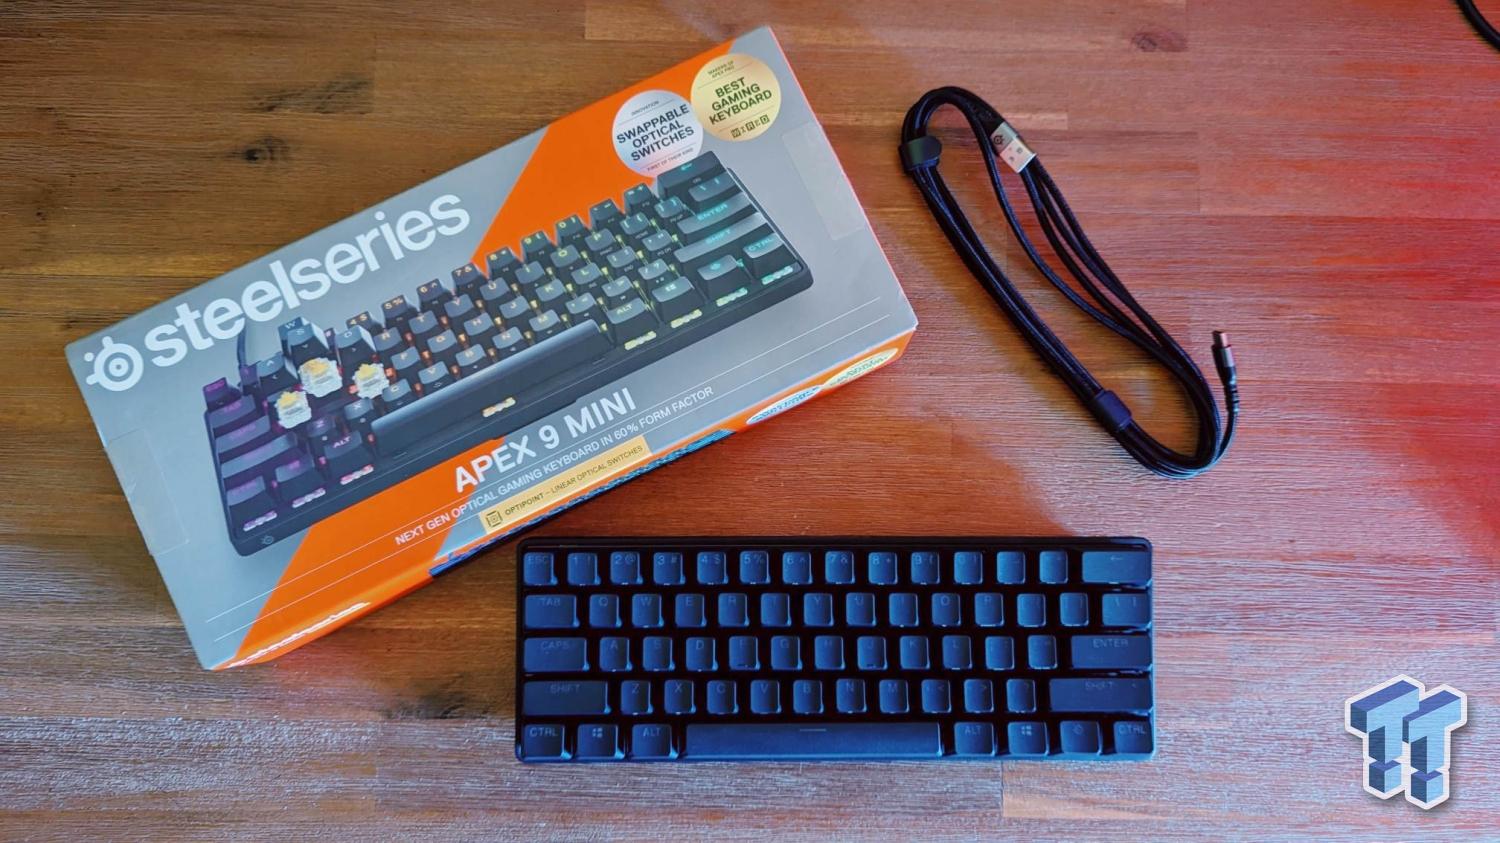 SteelSeries Apex 9 Mini Review - Introduction